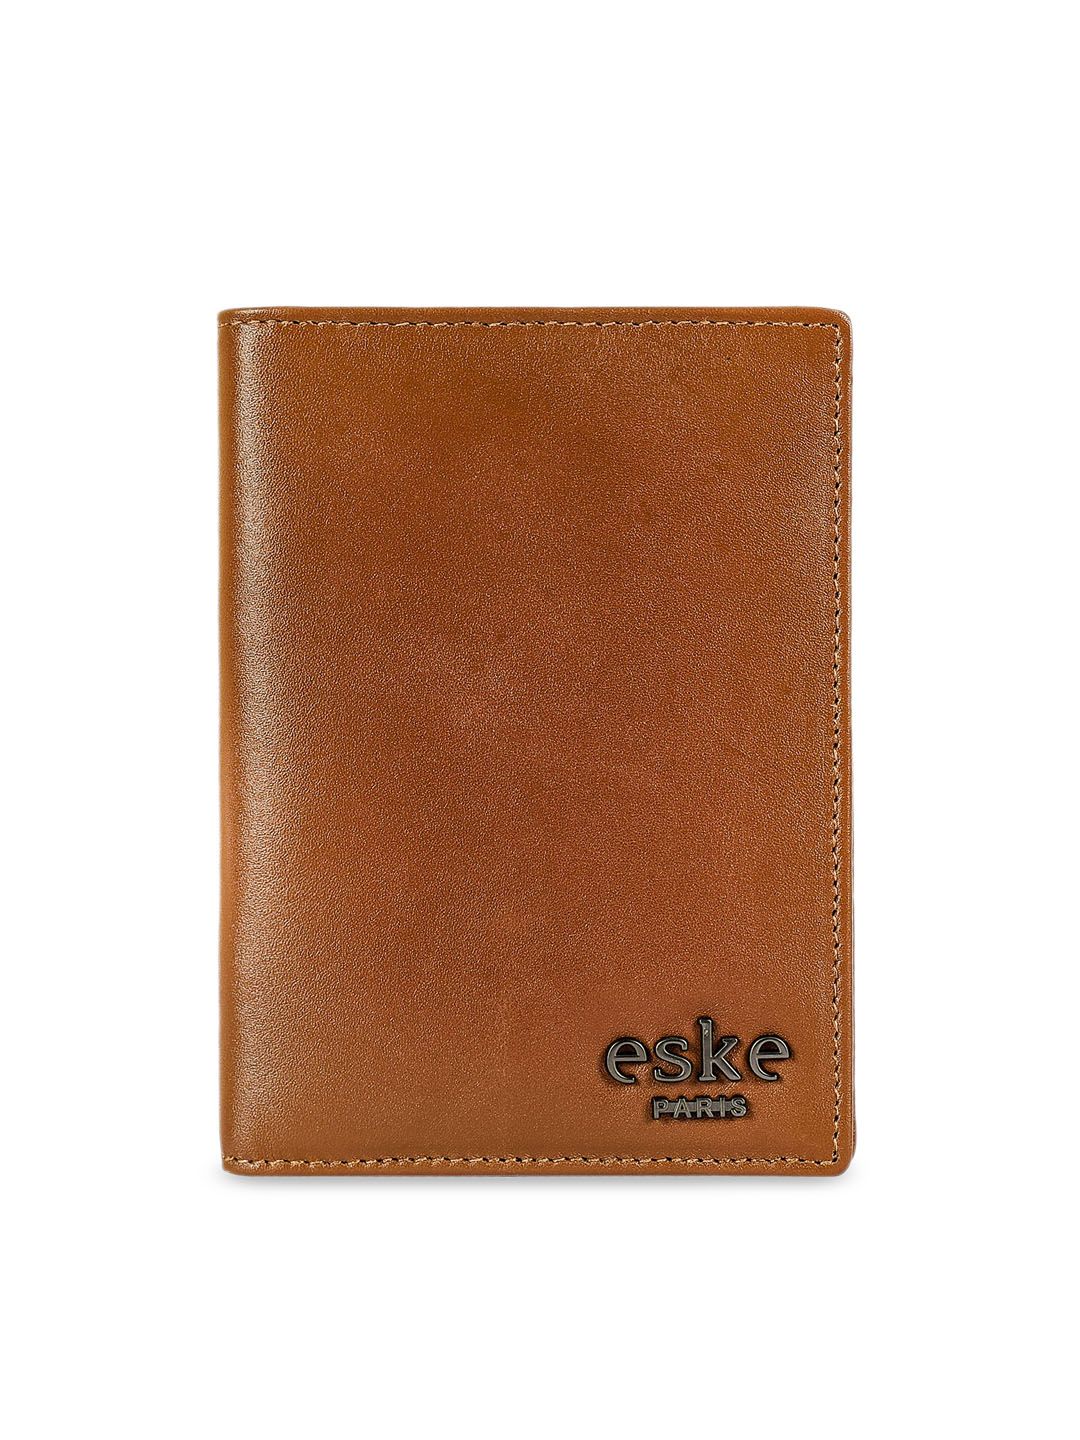 Eske Unisex Tan Brown Solid Leather Pace Passport Holder Price in India